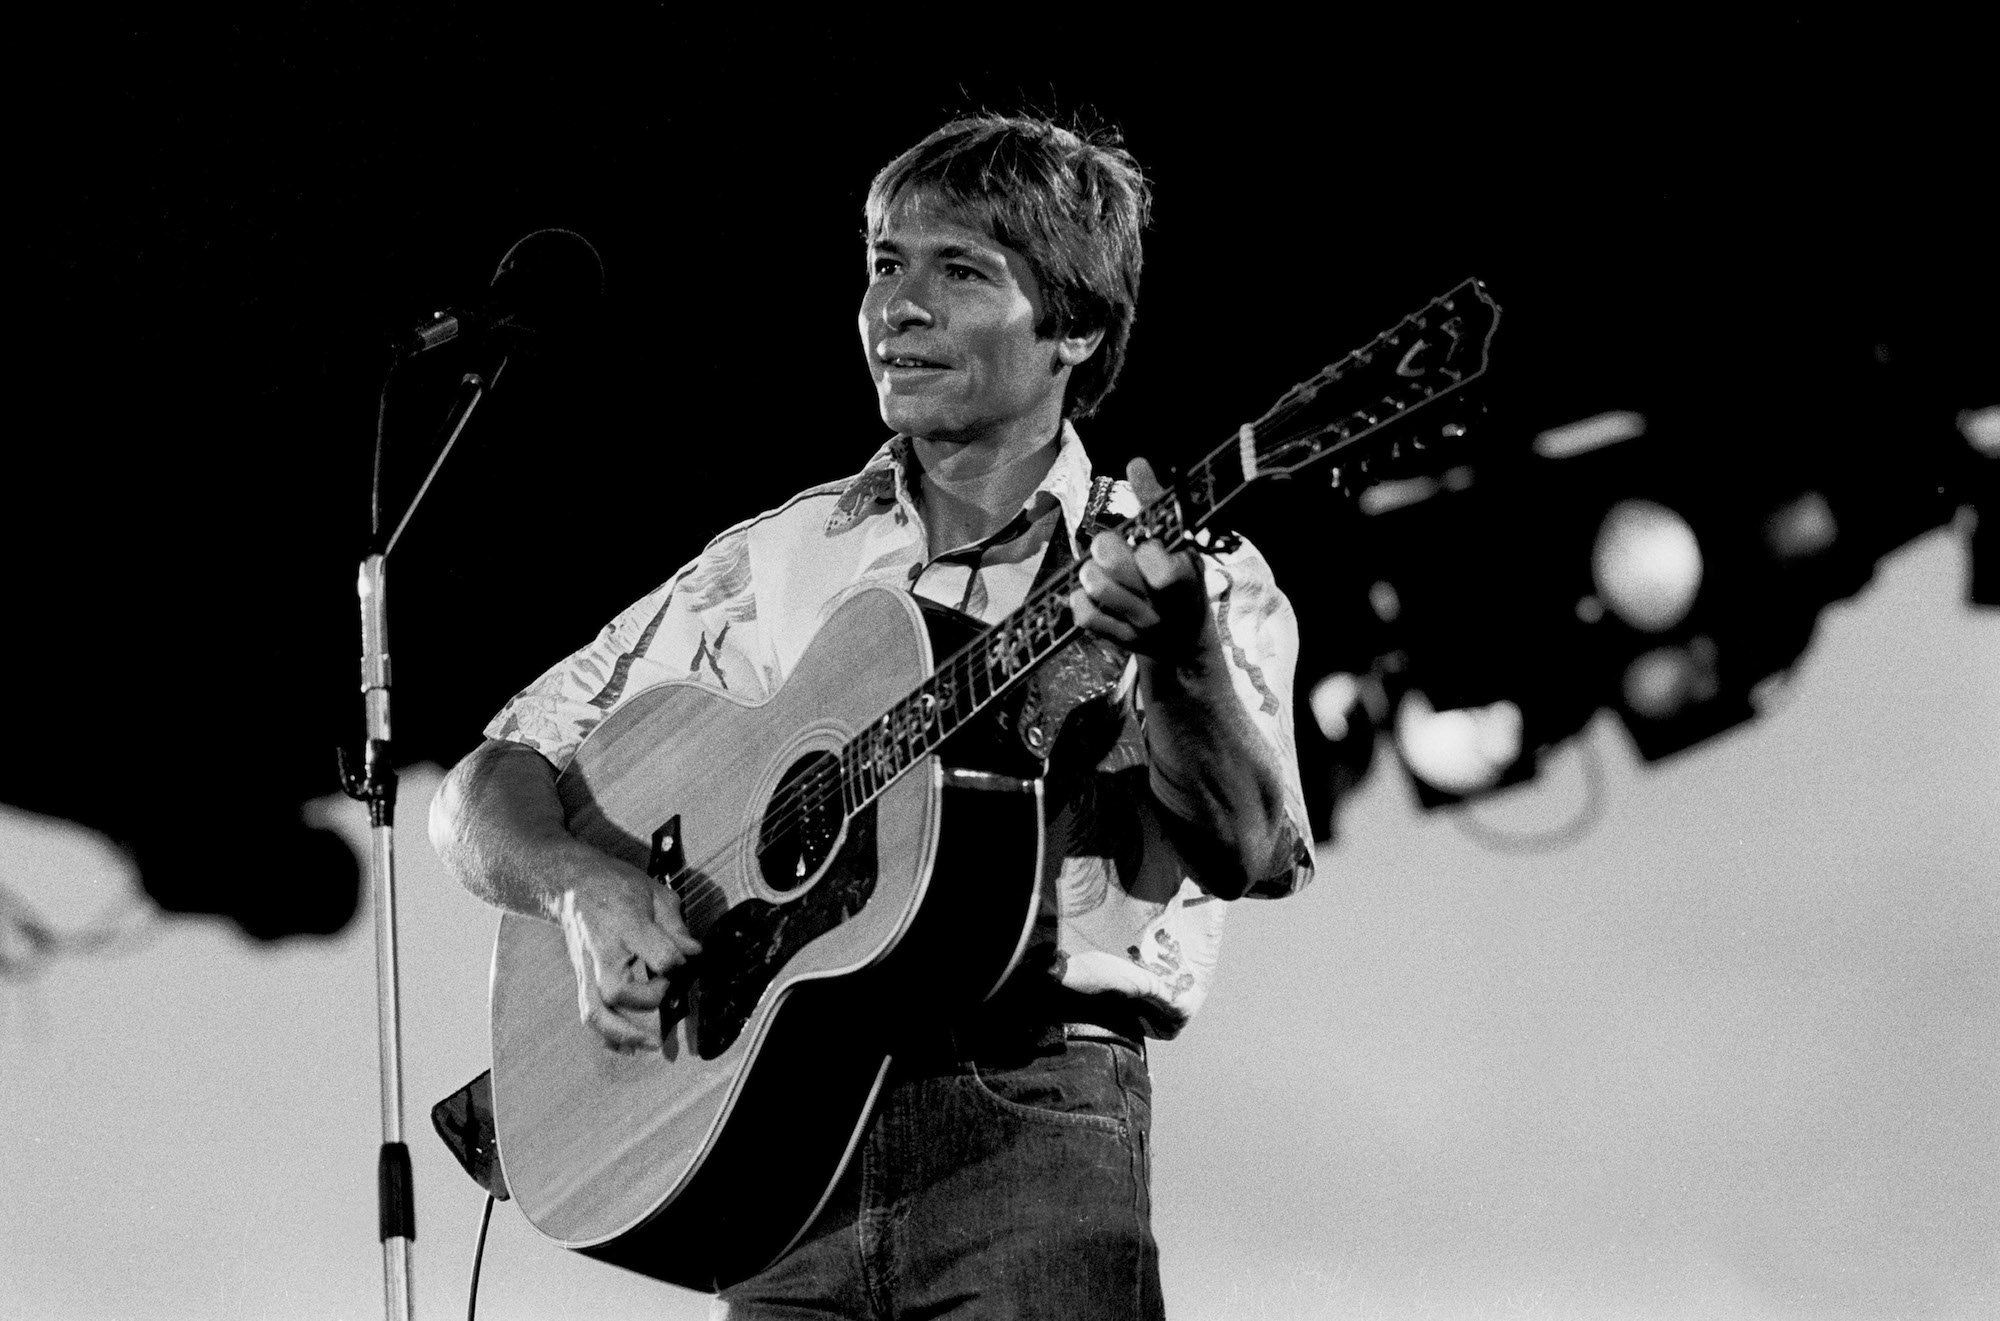 John Denver smiling, performing on stage, in black and white